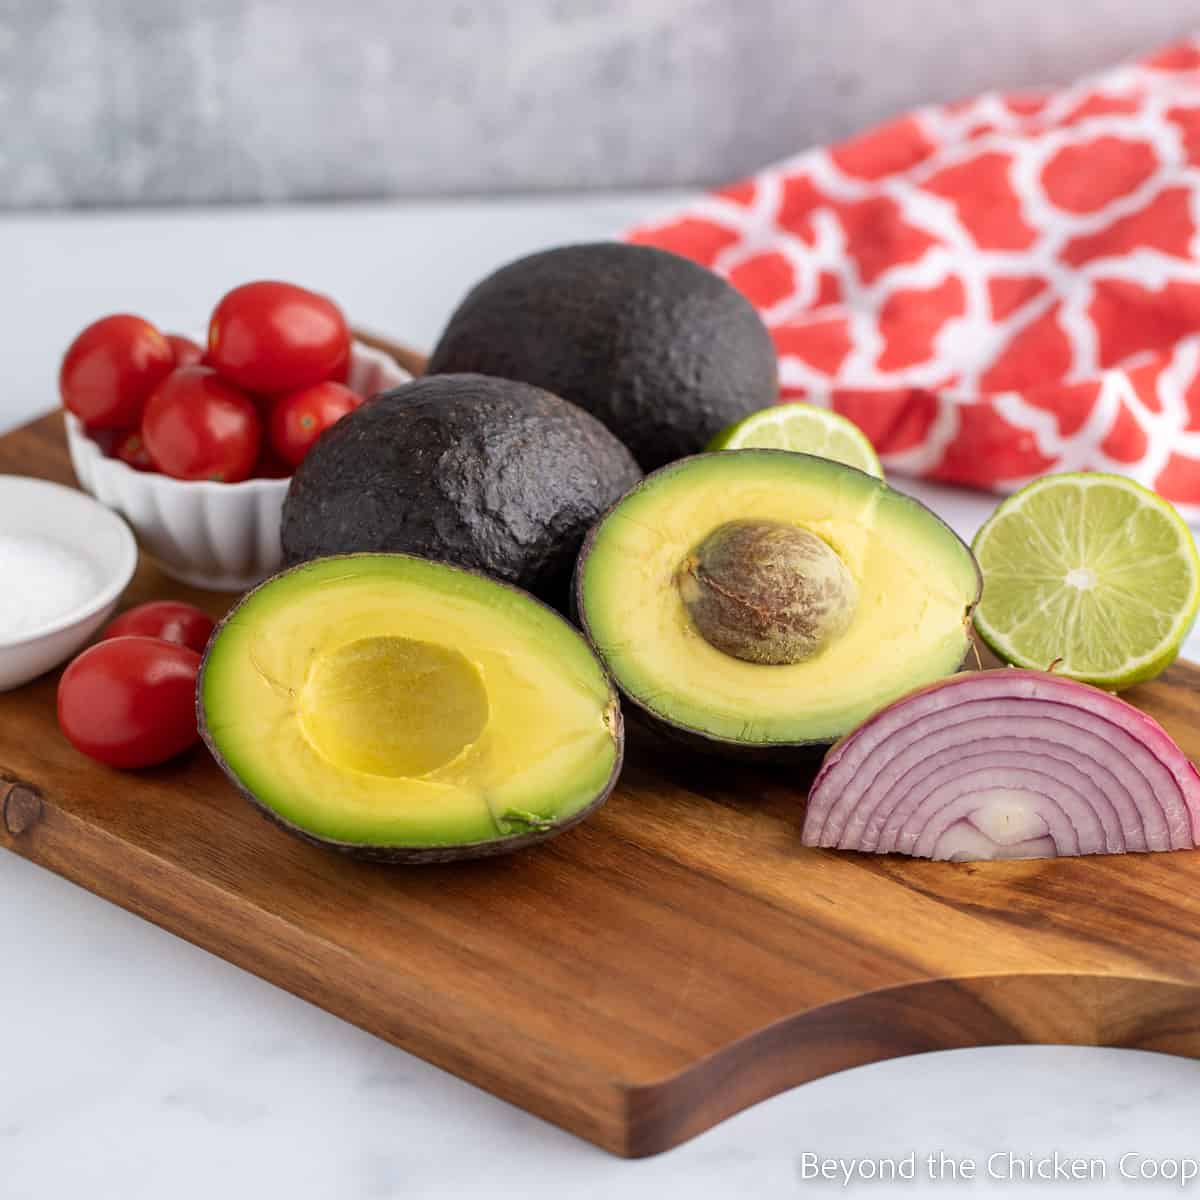 Ingredients for making guacamole. 